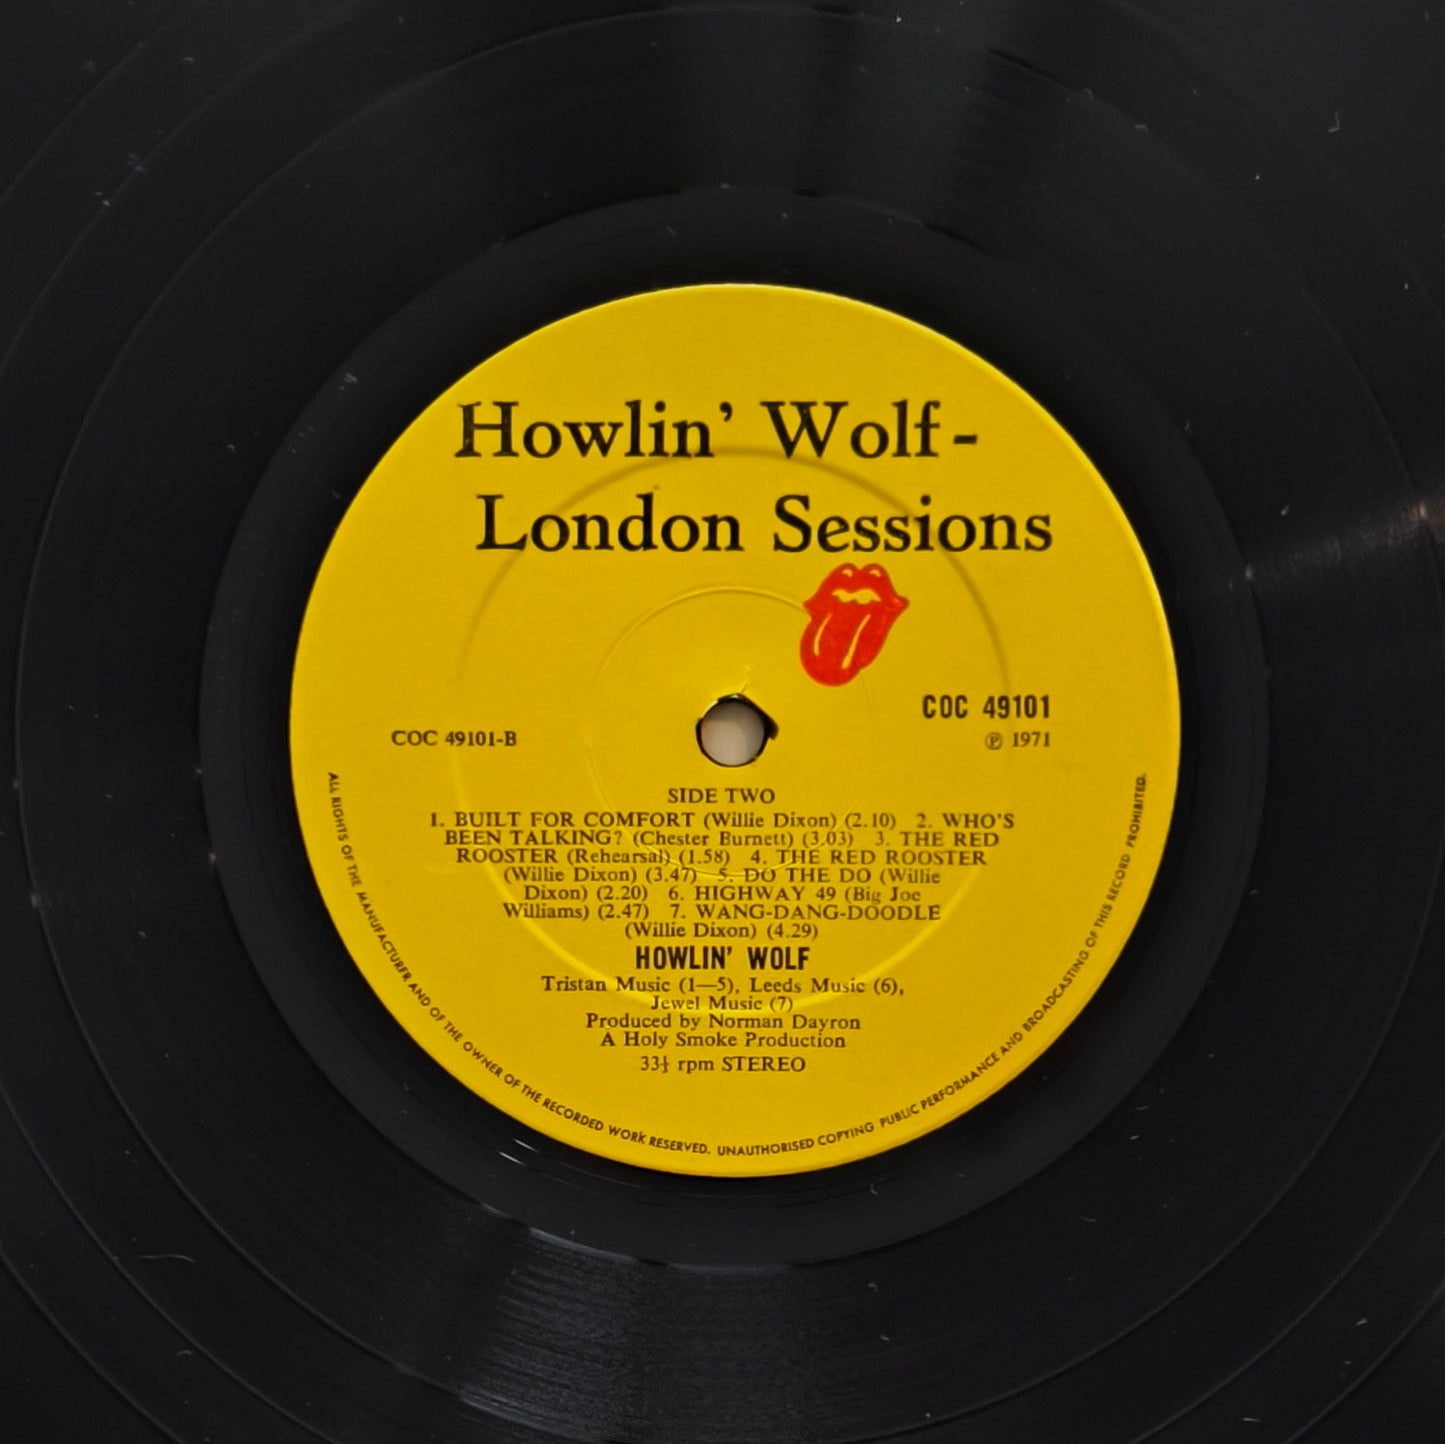 HOWLIN' WOLF - The London Howlin' Wolf Sessions (pressage UK 71)